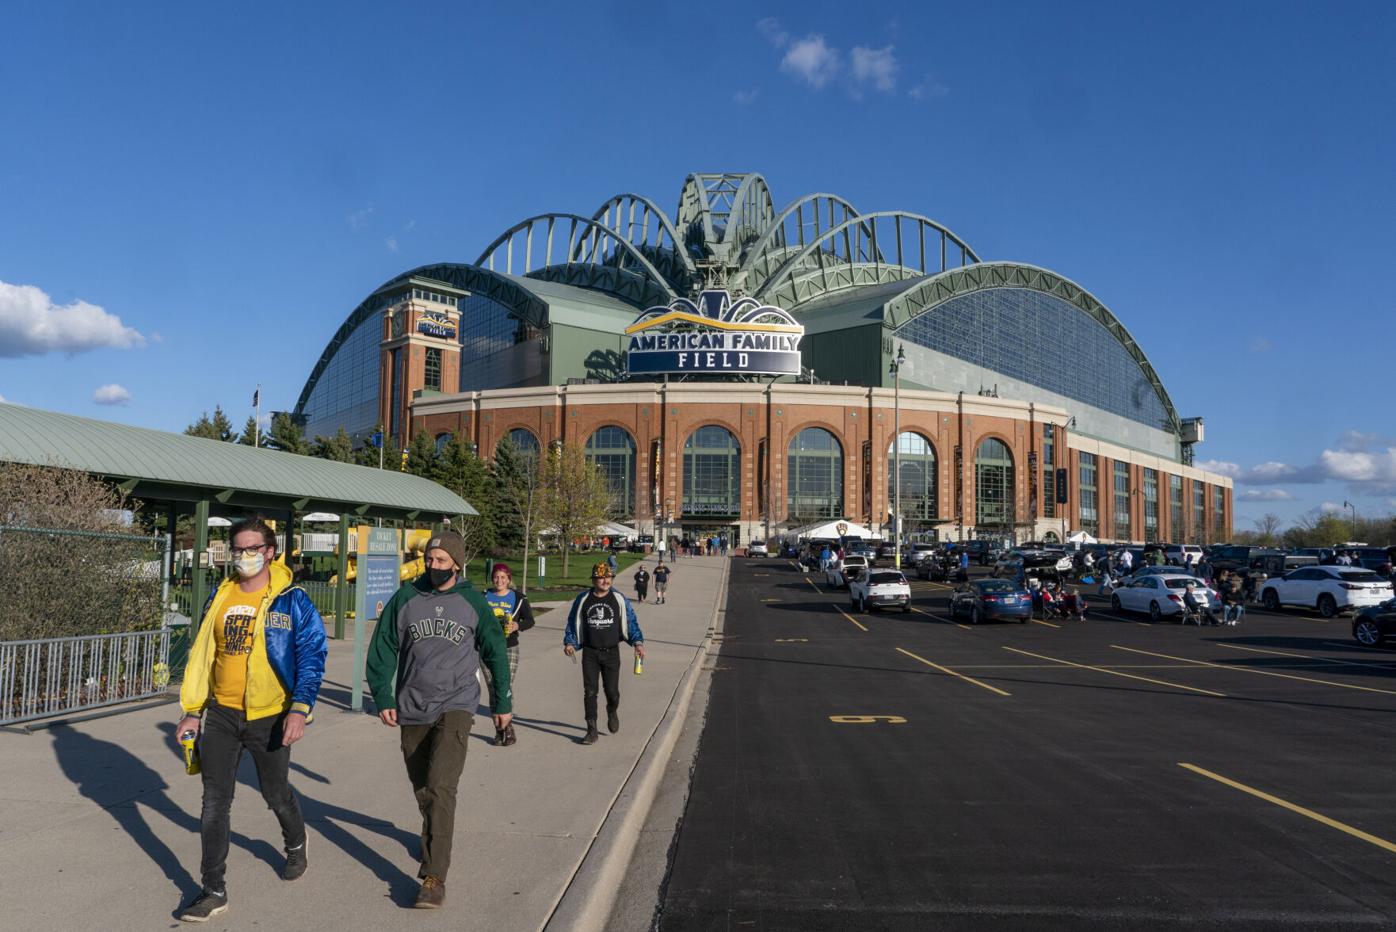 Milwaukee Brewers could move away from Wisconsin, says report